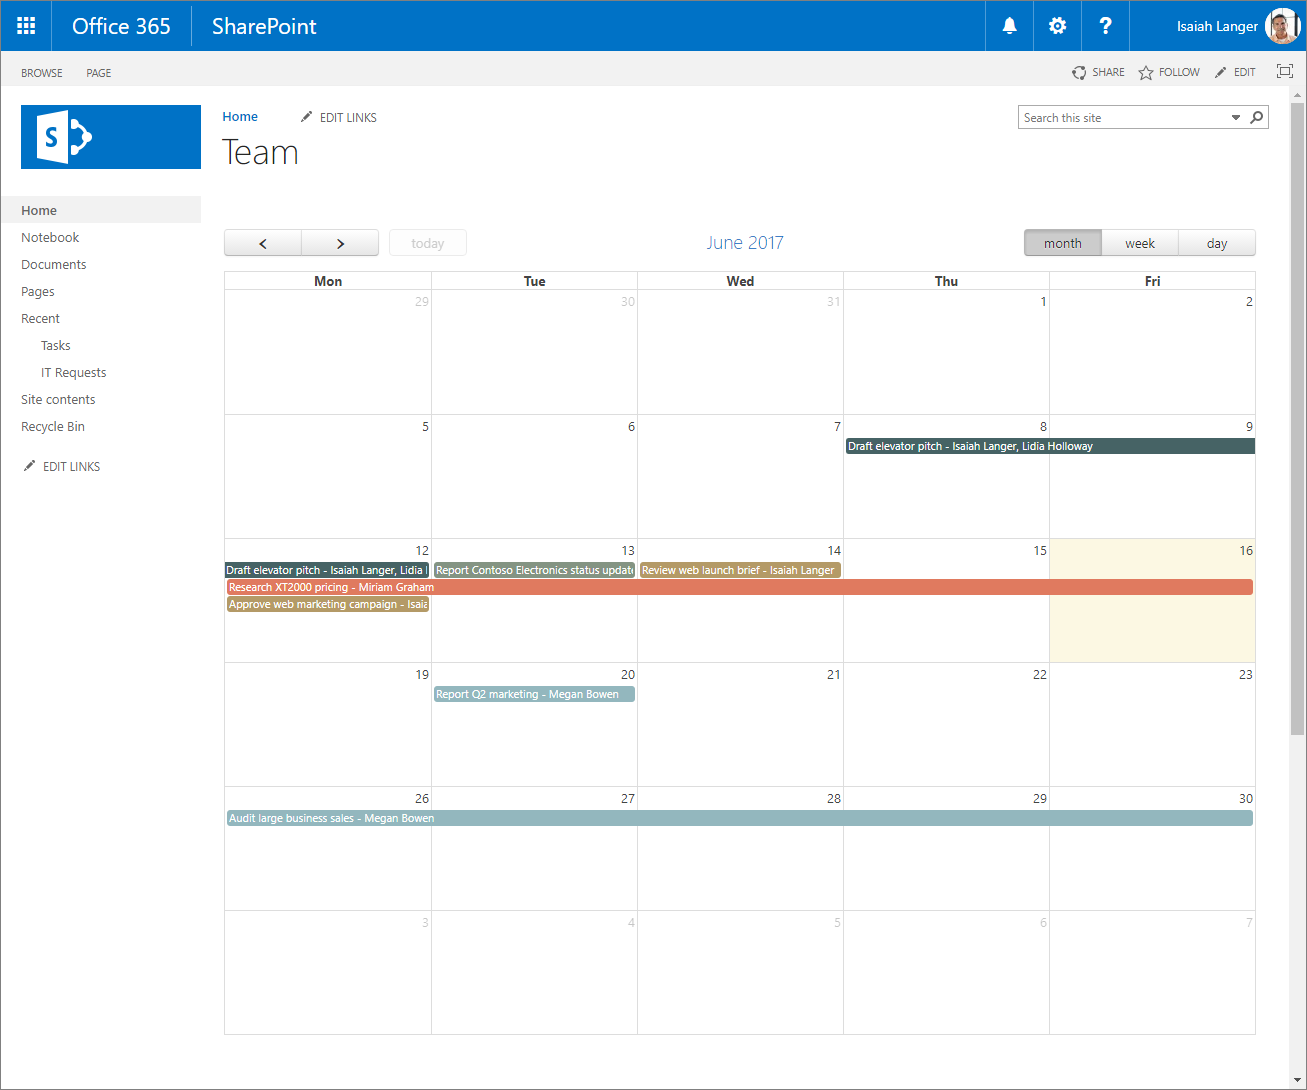 Calendar view of tasks displayed on a SharePoint page